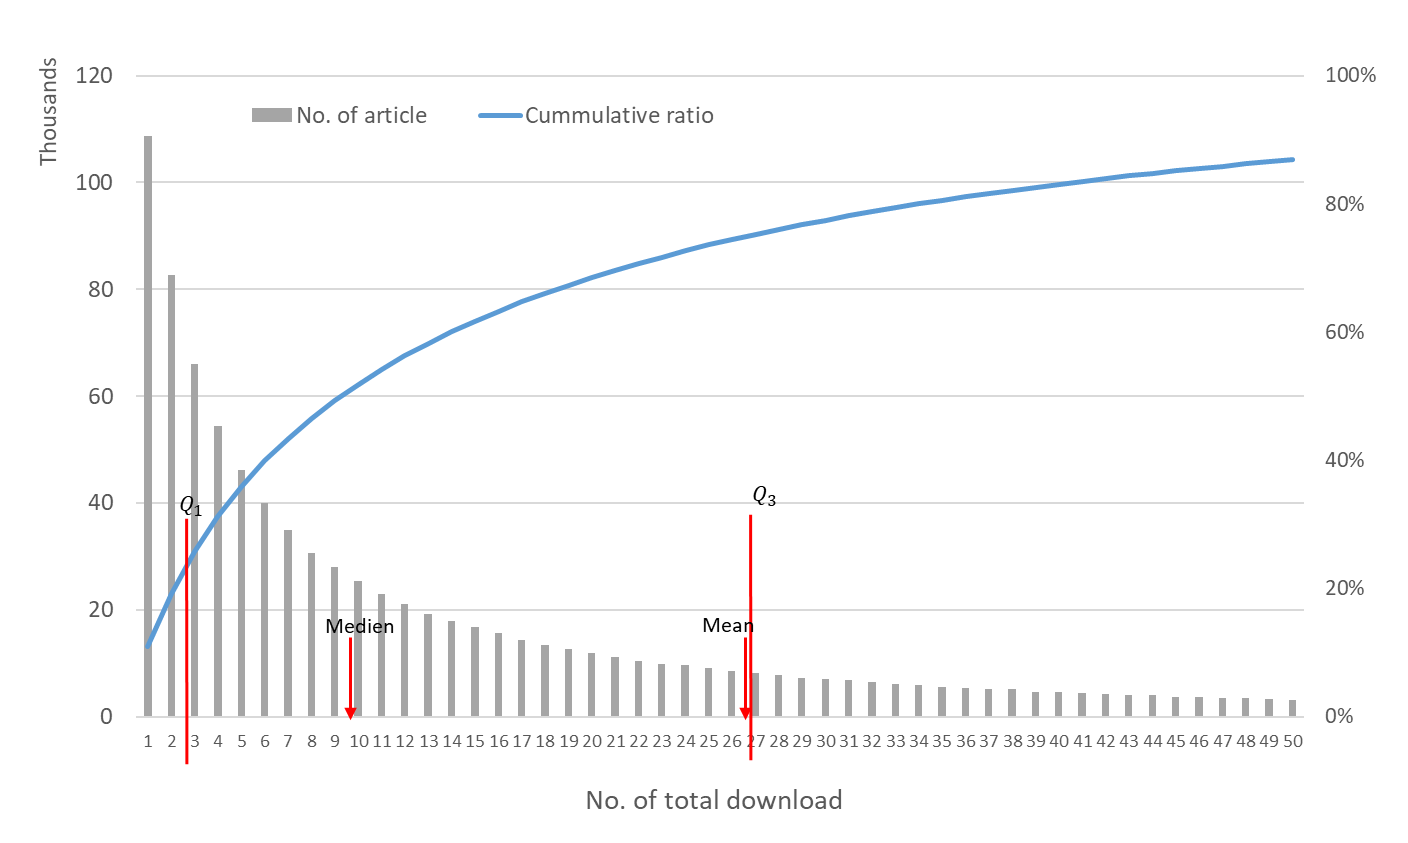 Figure 3: Pareto analysis of the number of downloads